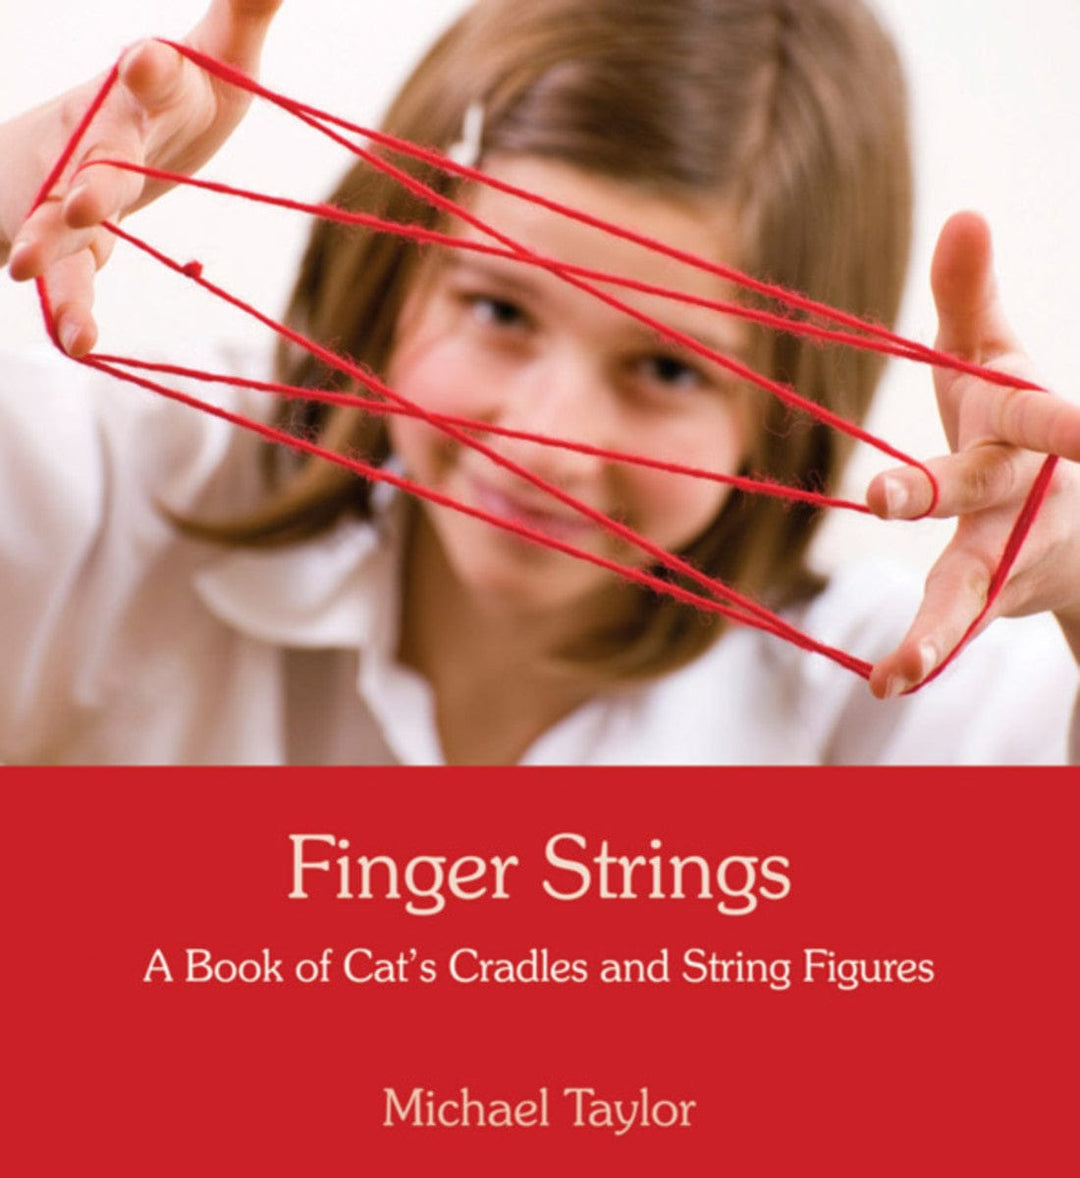 Default Finger Strings: A Book of Cat’s Cradles and String Figures by Michael Taylor